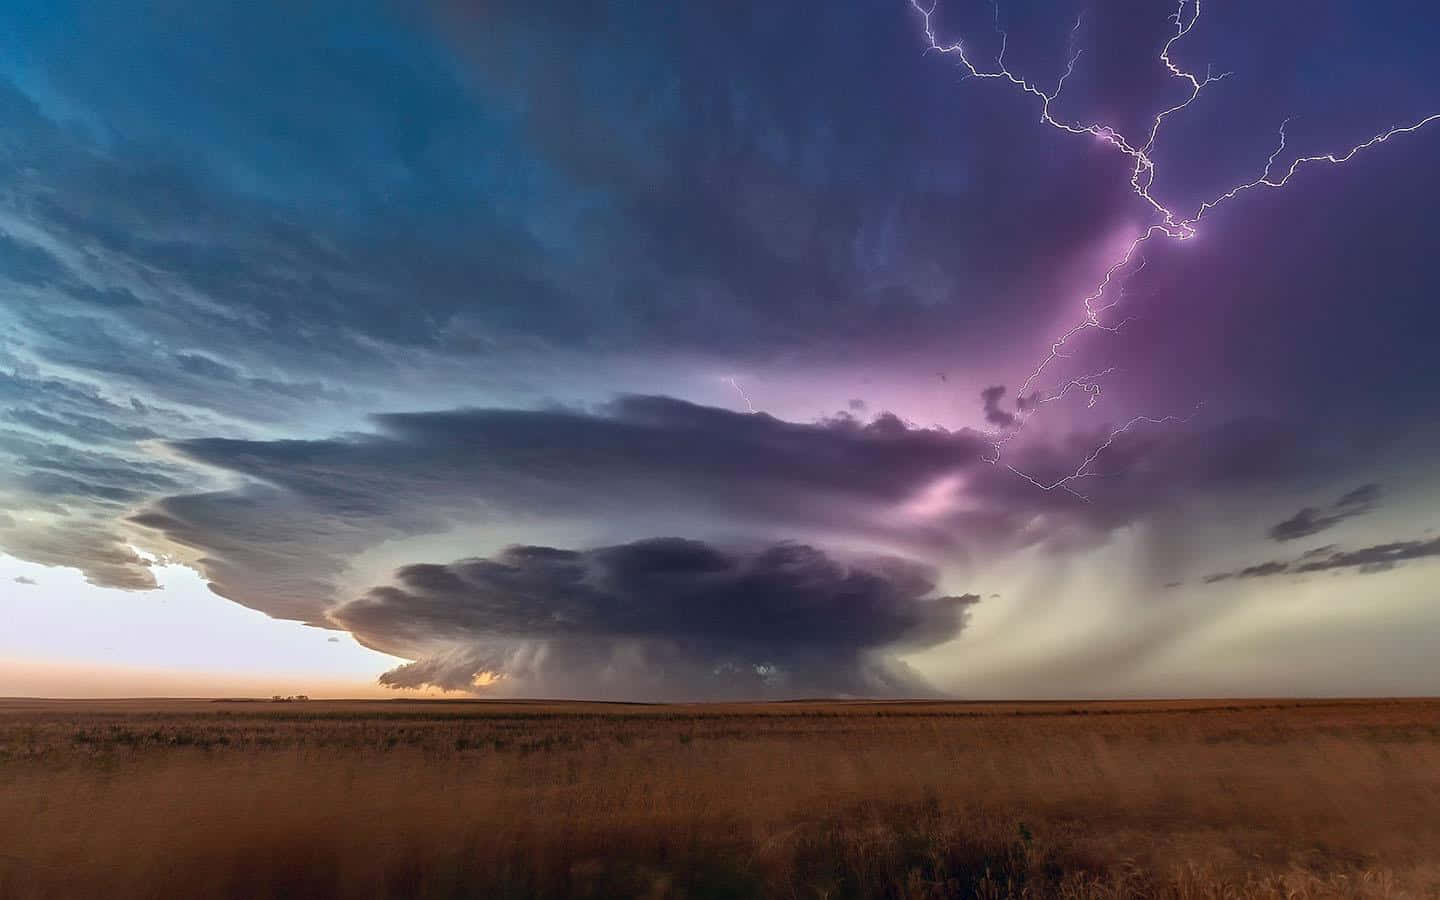 Majestic Thunderstorm Over a Tranquil Landscape